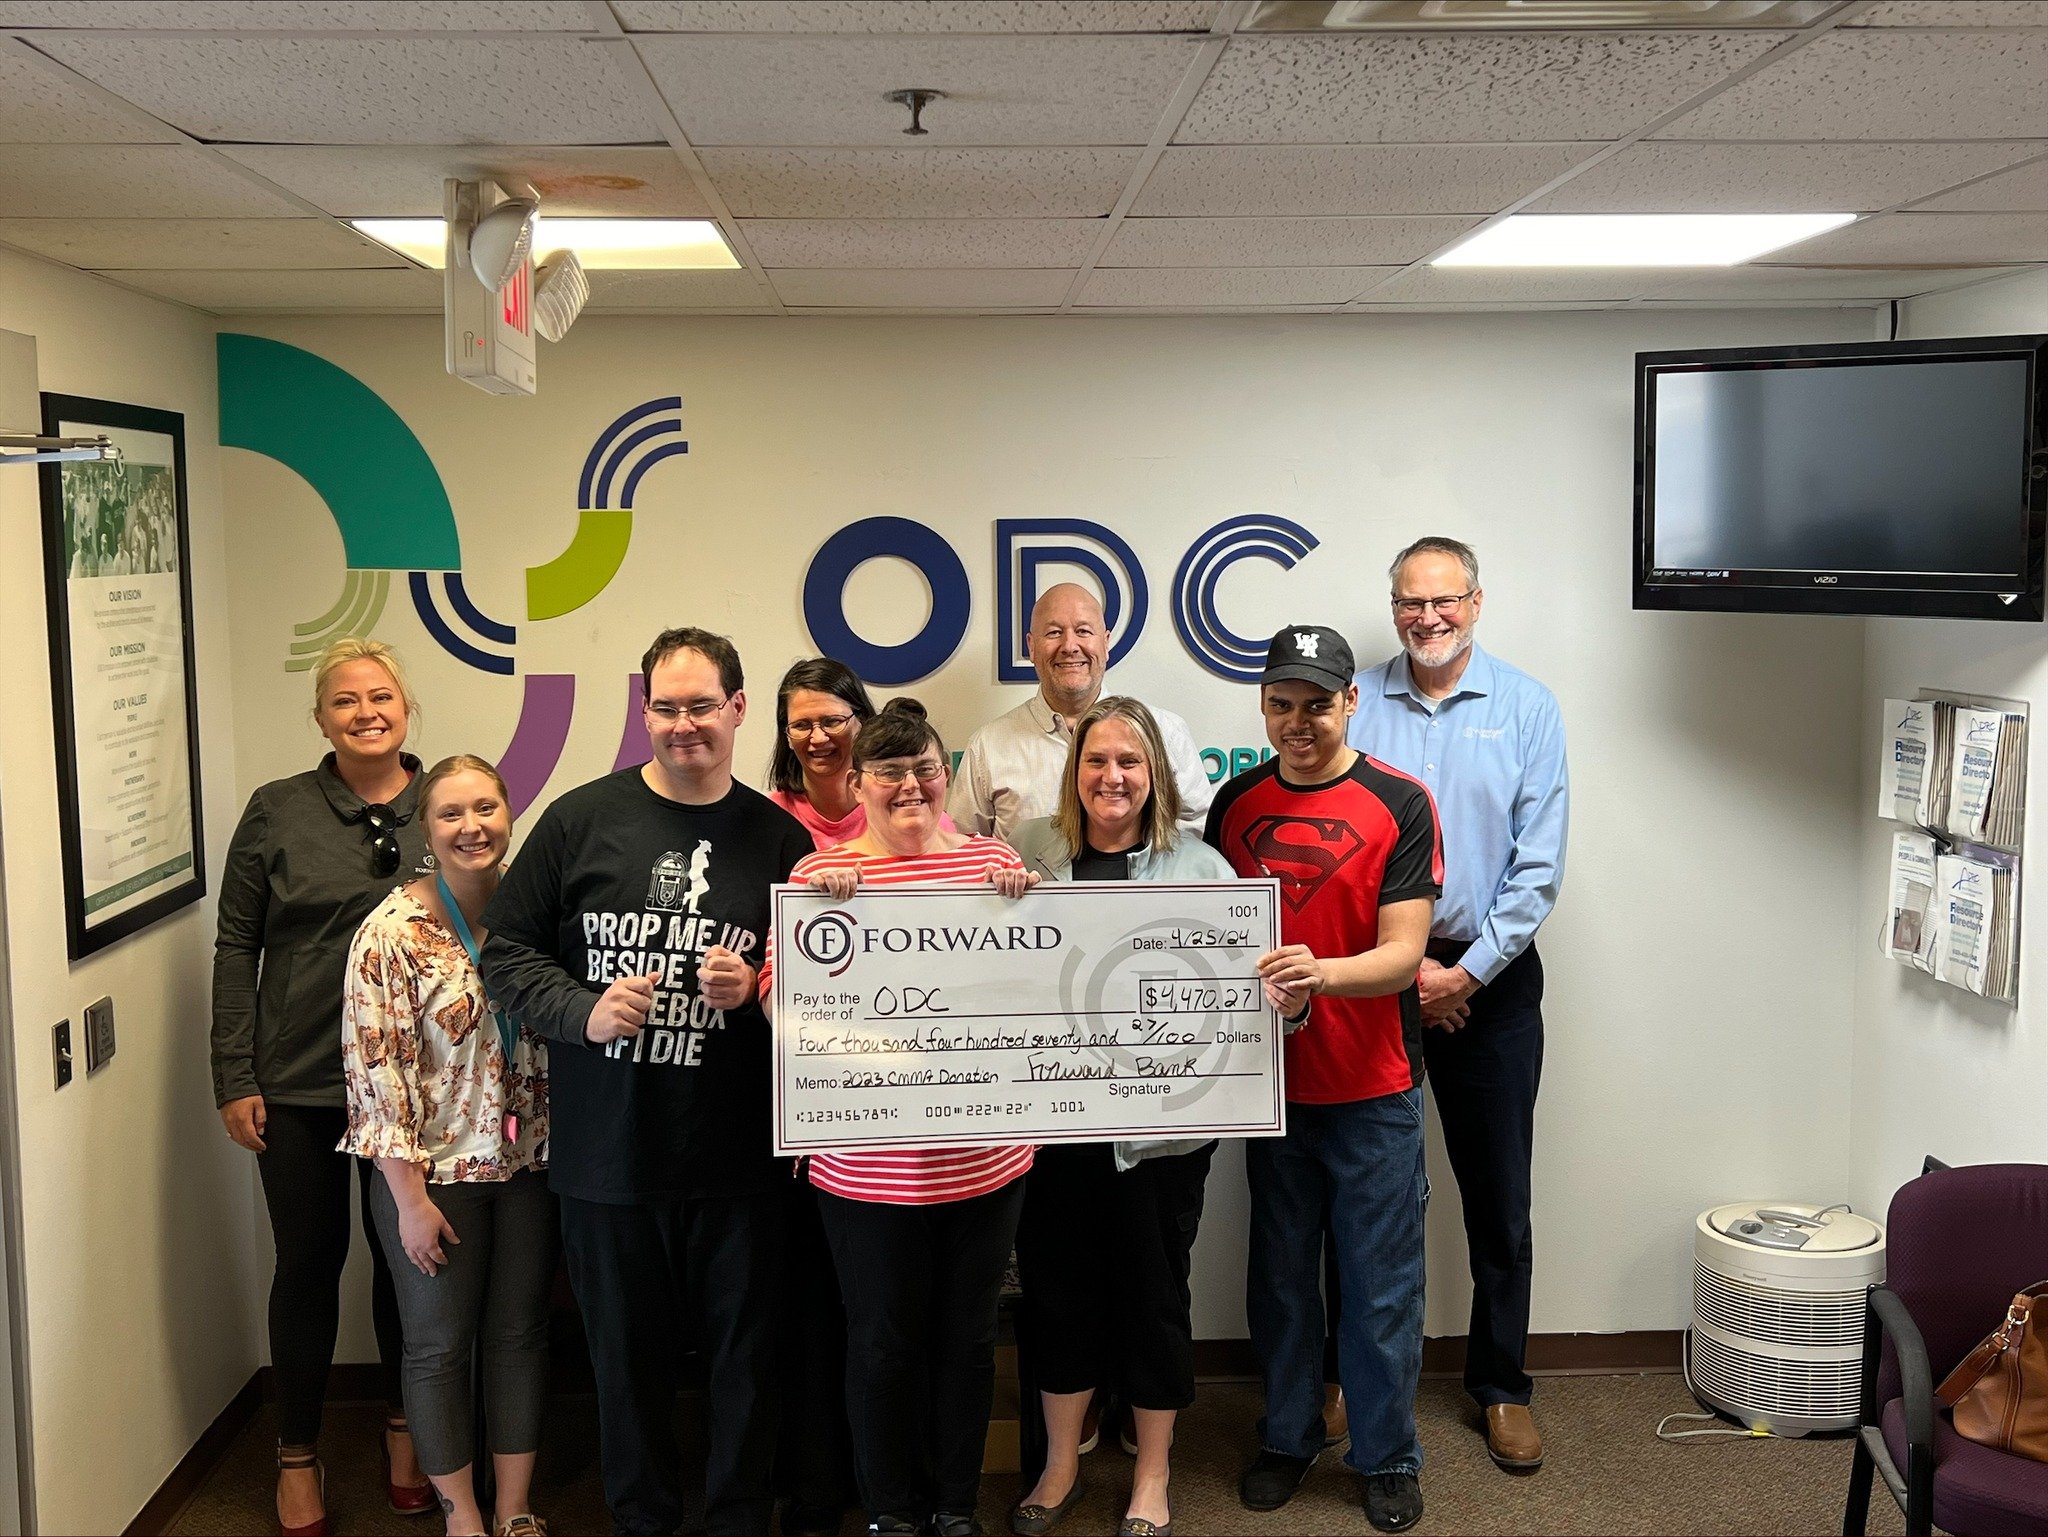 𝐀 𝐇𝐔𝐆𝐄 𝐓𝐇𝐀𝐍𝐊 𝐘𝐎𝐔 to everyone who opened a CMMA at Forward Bank and named ODC as their preferred organization! We appreciate all of your support! Also, 𝐓𝐇𝐀𝐍𝐊 𝐘𝐎𝐔 𝐒𝐎 𝐌𝐔𝐂𝐇 𝐓𝐎 𝐅𝐎𝐑𝐖𝐀𝐑𝐃 𝐁𝐀𝐍𝐊 for offering this wonderf